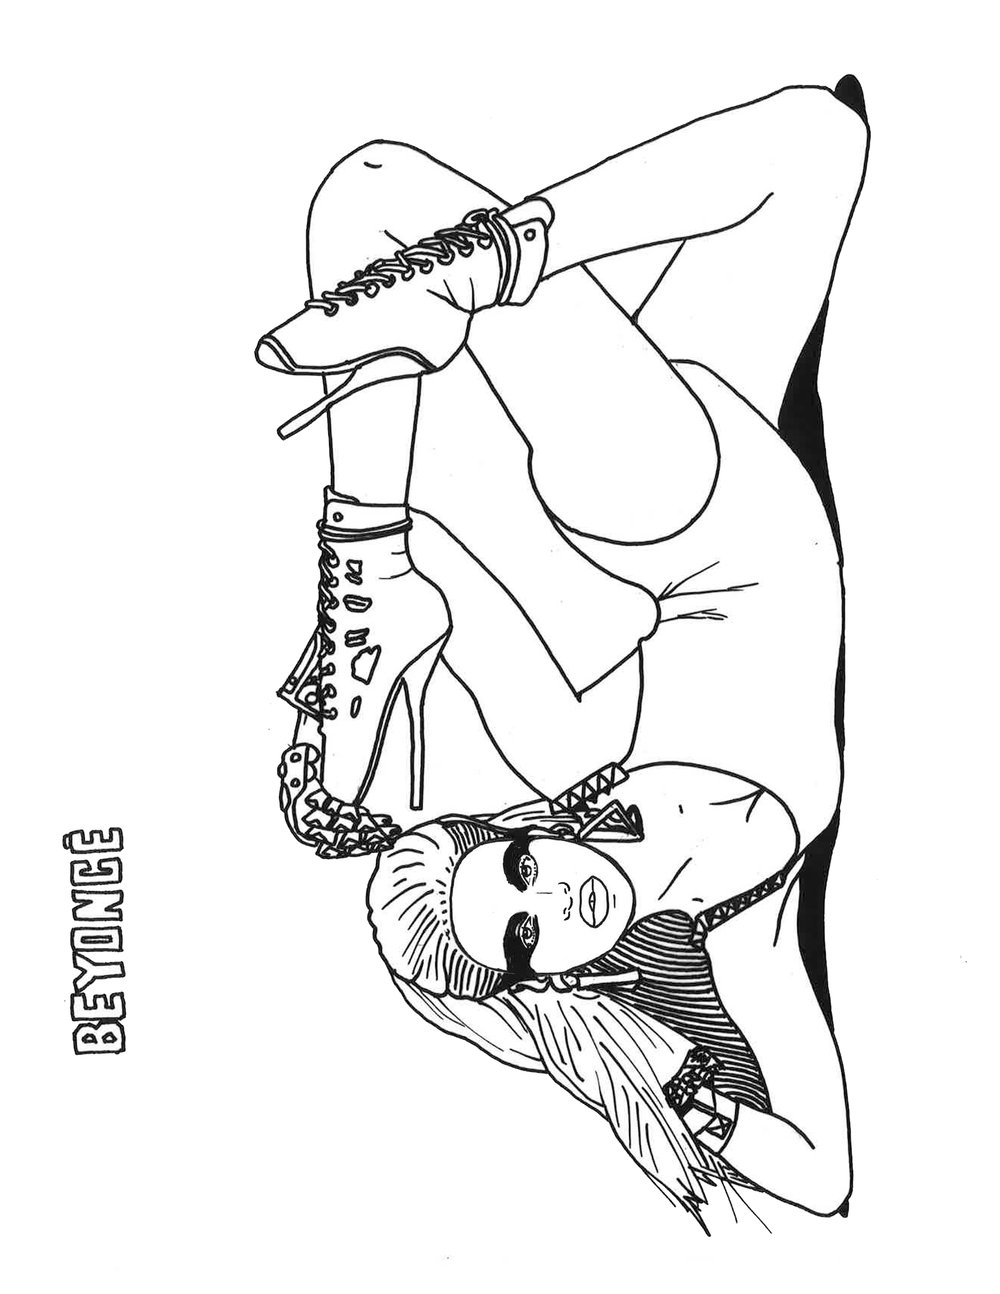 Influential Women of Music Coloring Book Vol. 2